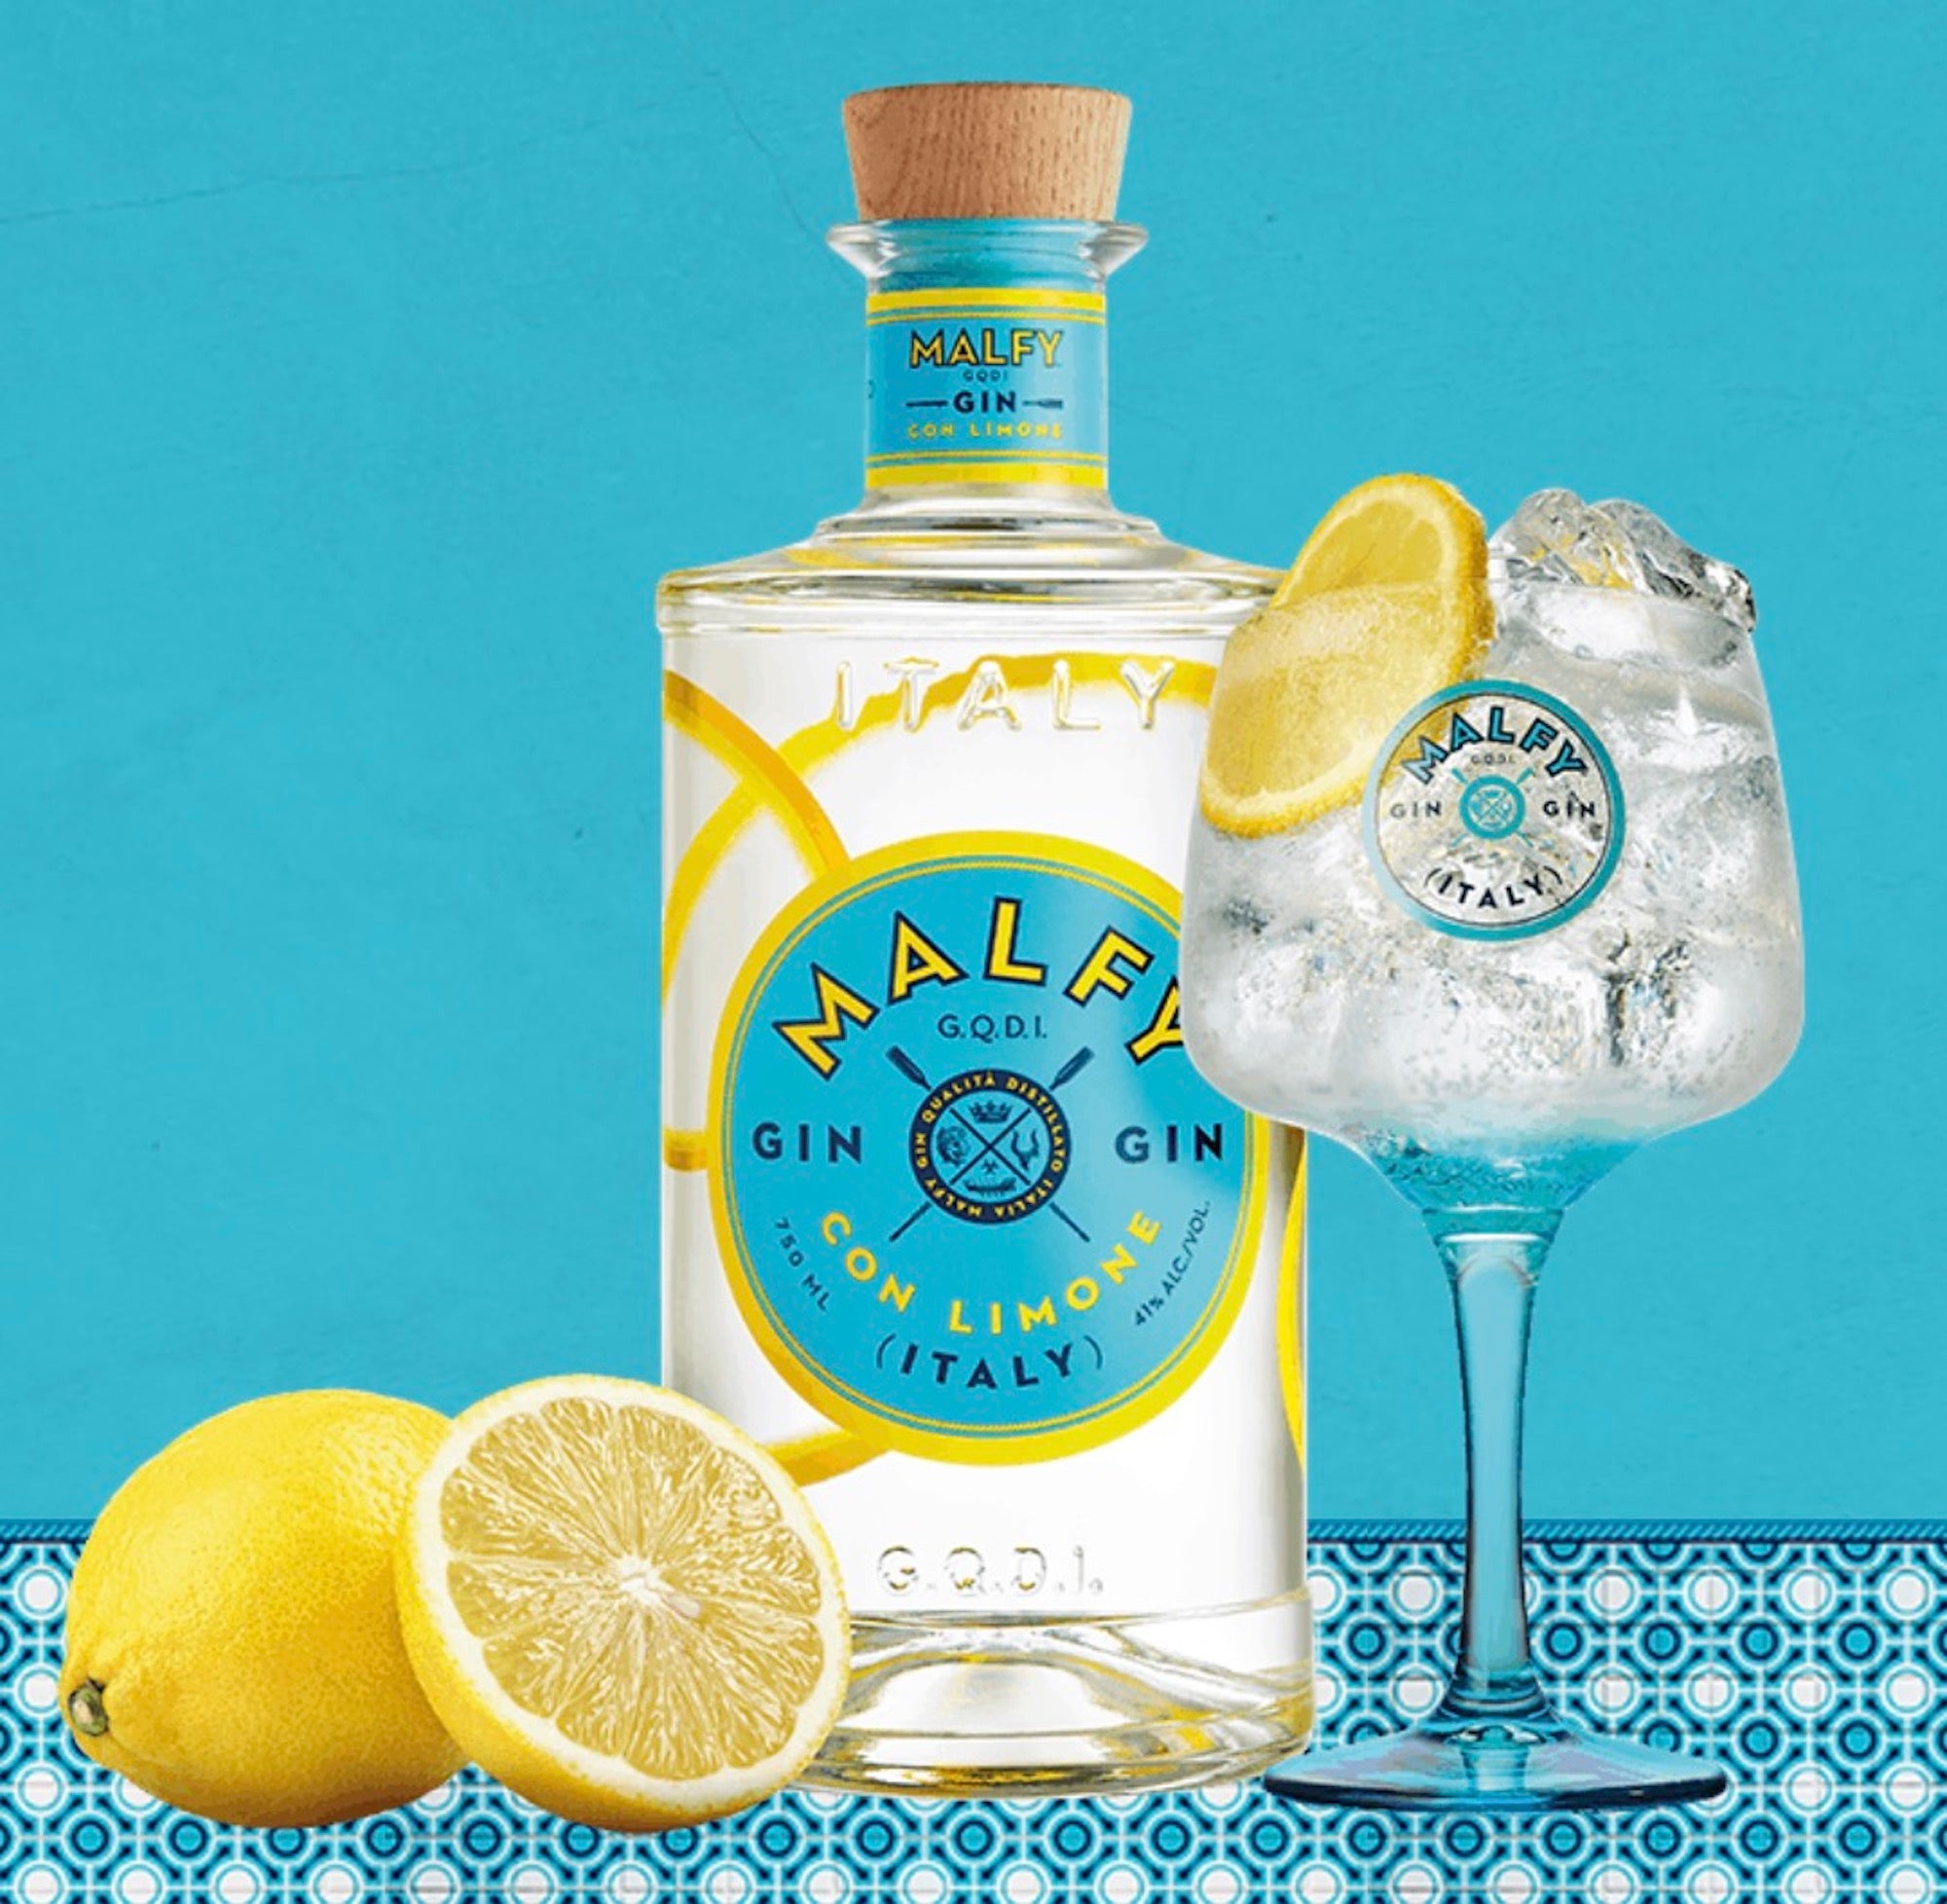 Malfy Gin Con Limone | Delivery & Gifting | Gin